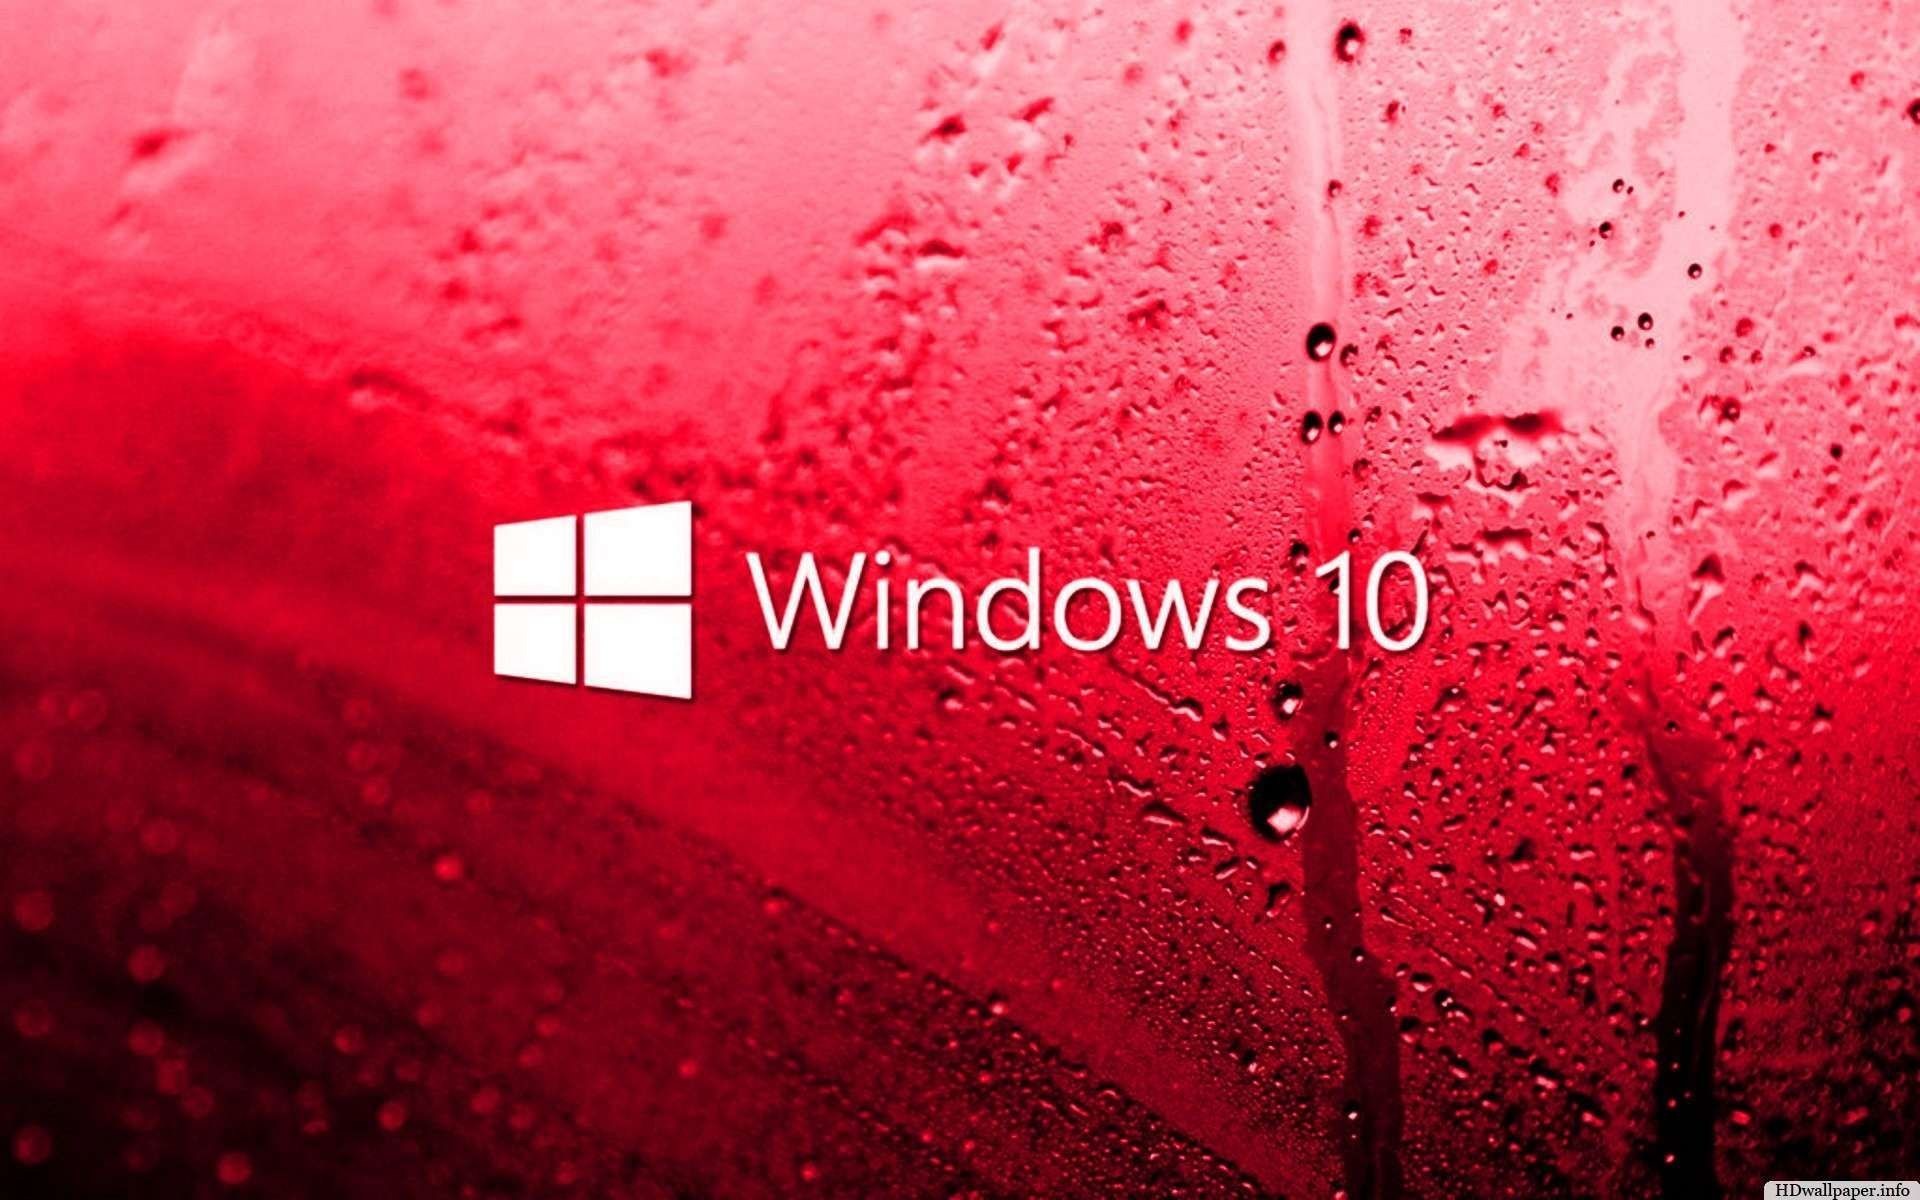 1920x1200 2560x1440 Windows 10 Wallpapers Awesome Wallpapers 2560x1440